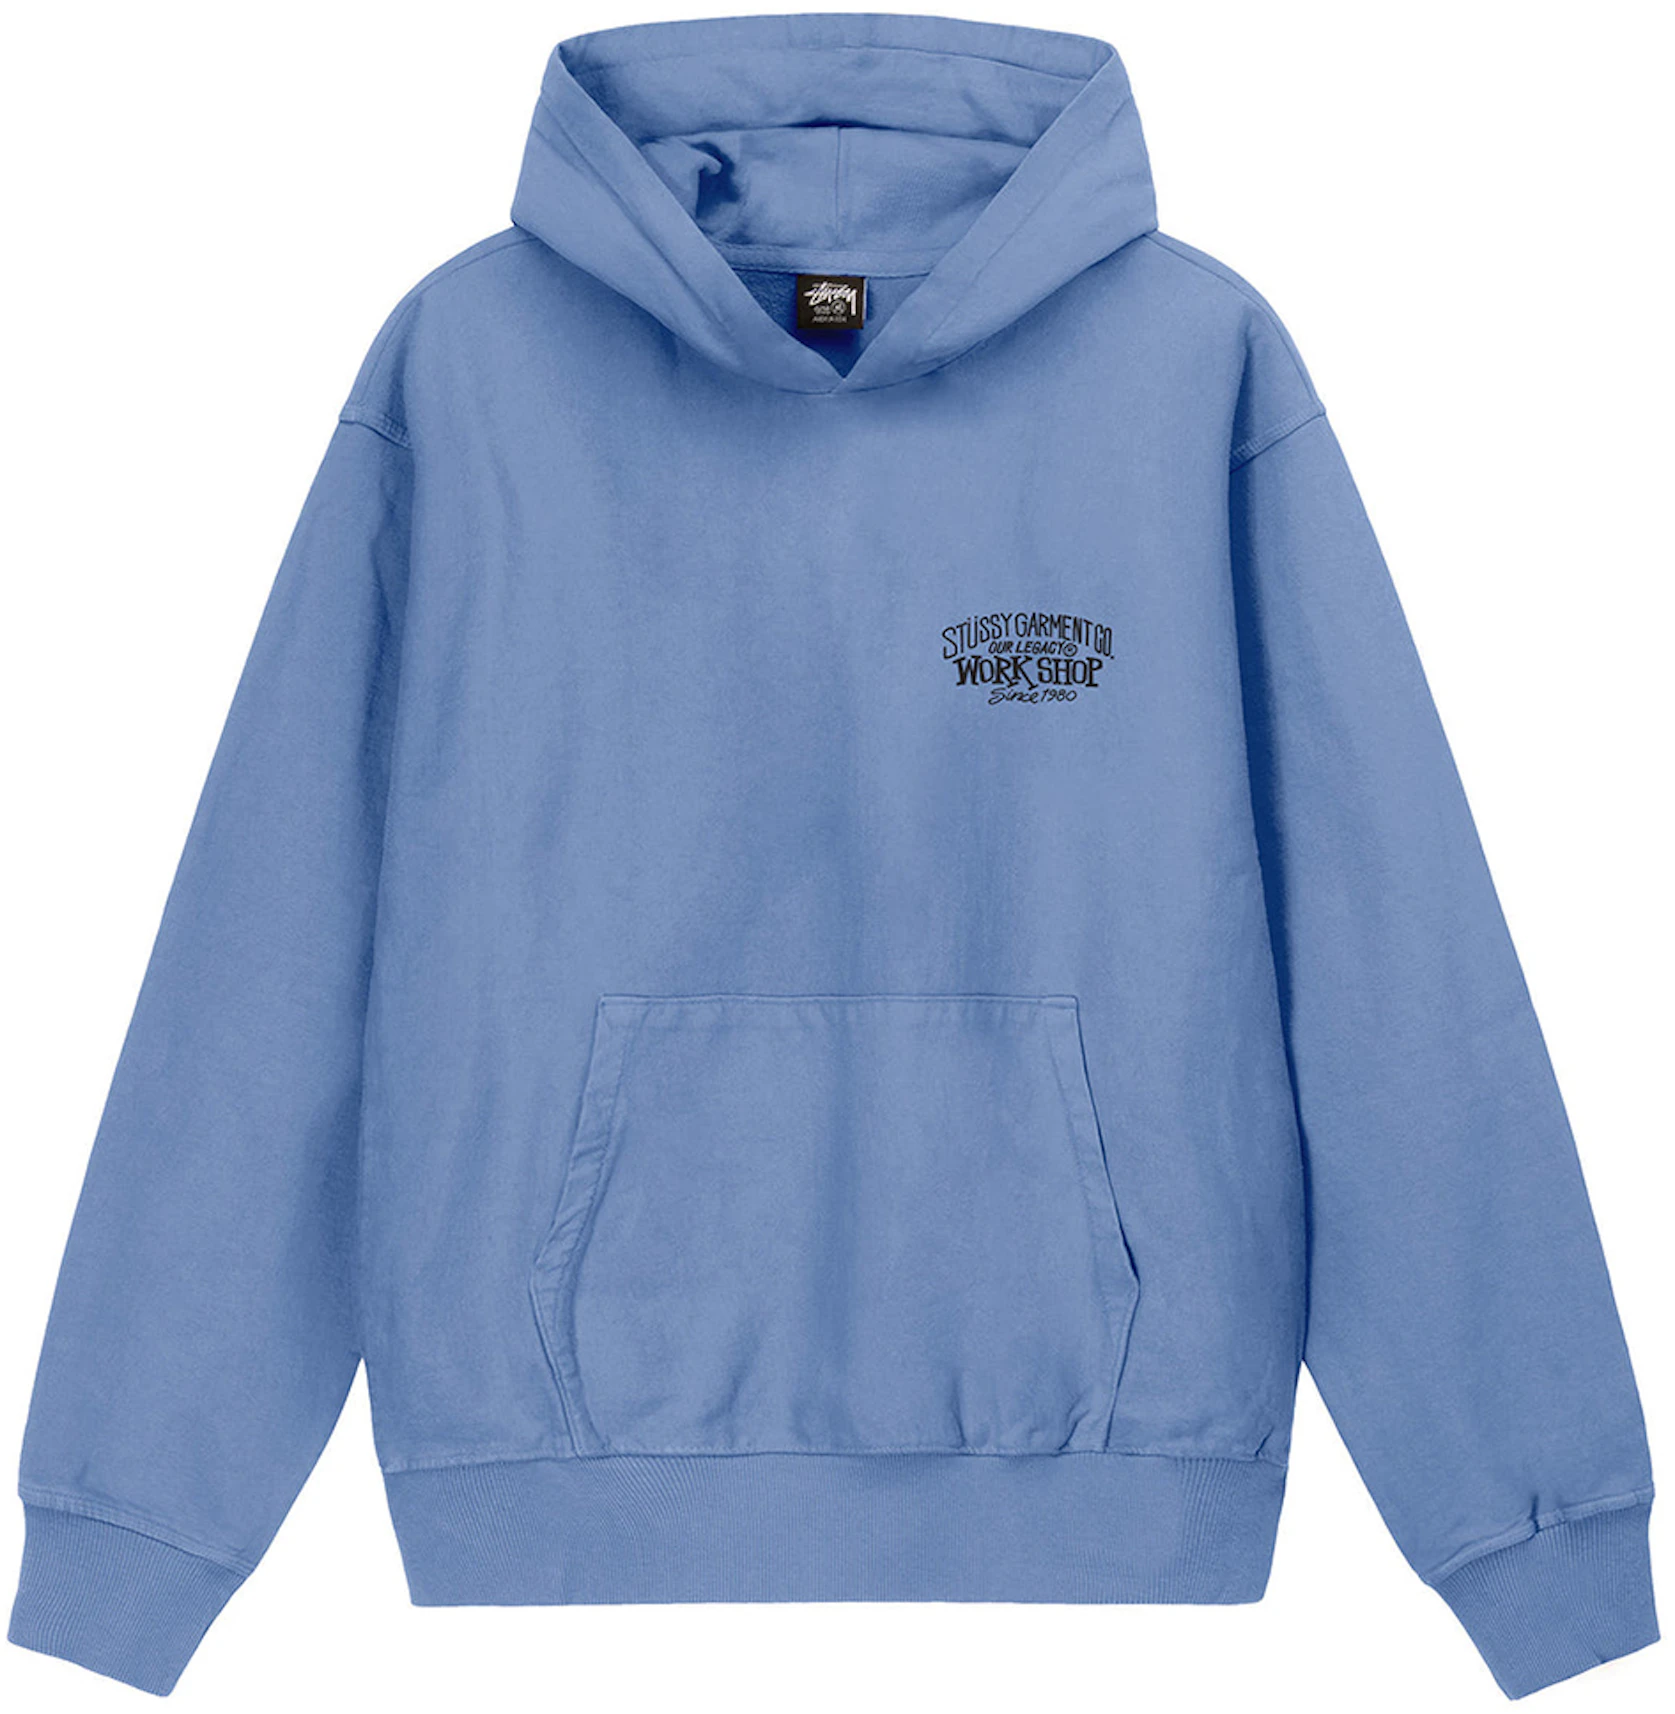 Stussy x Our Legacy Work Shop Surfman Pigment Dyed Hoodie Blue - SS23 - US